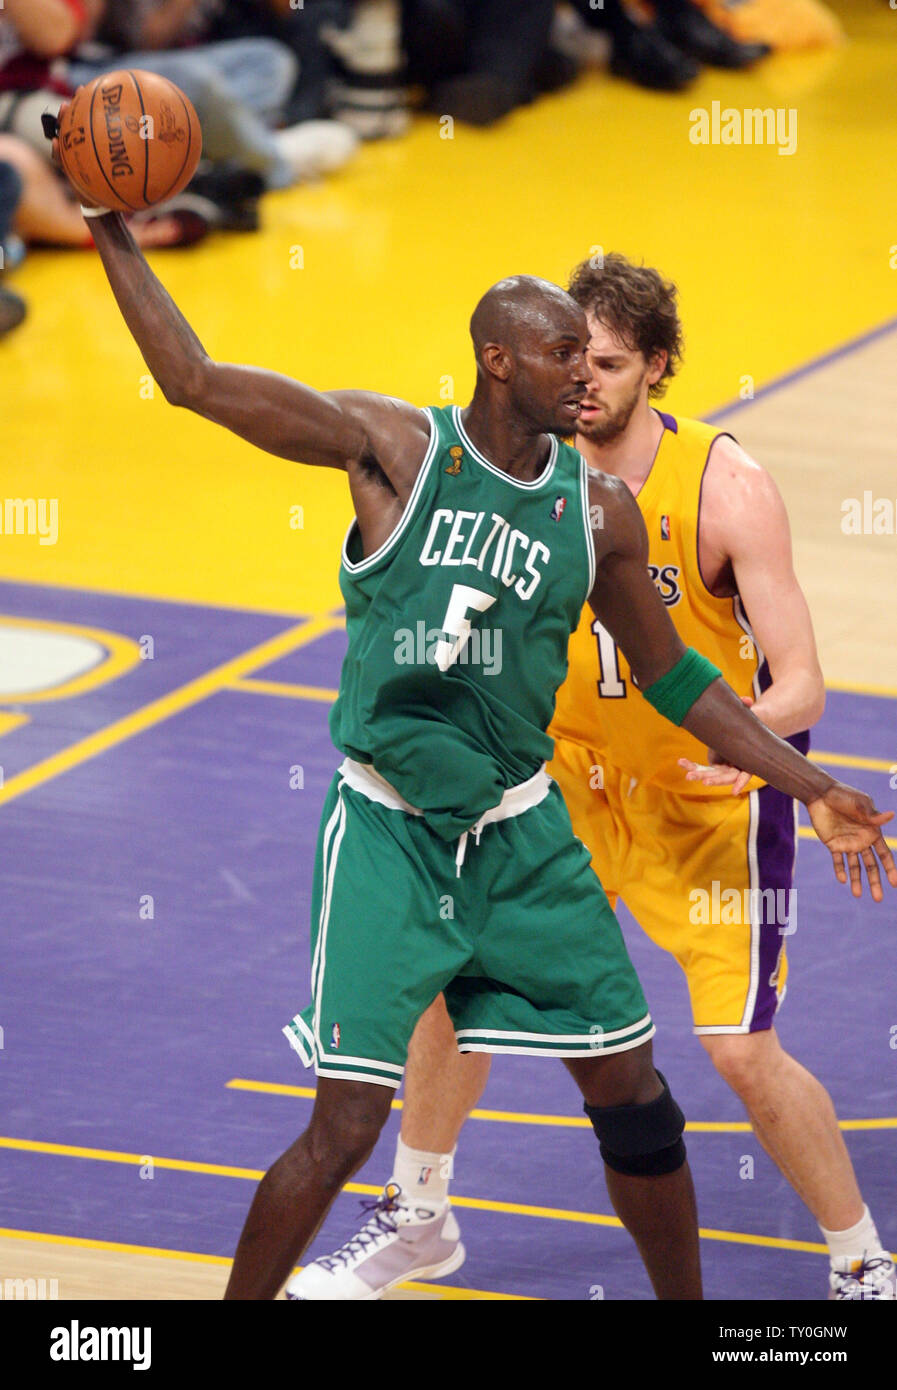 Boston Celtics' Kevin Garnett (5) posts up against Los Angeles Lakers' Pau Gasol in Game 3 of the NBA finals at Staples Center in Los Angeles on June 10, 2008. The Lakers defeated the Celtics 87-81 to stave off a 3-0 hole in the best-of-seven series. The Celtics lead the series 2-1.  (UPI Photo/Lazlo Fitz) Stock Photo